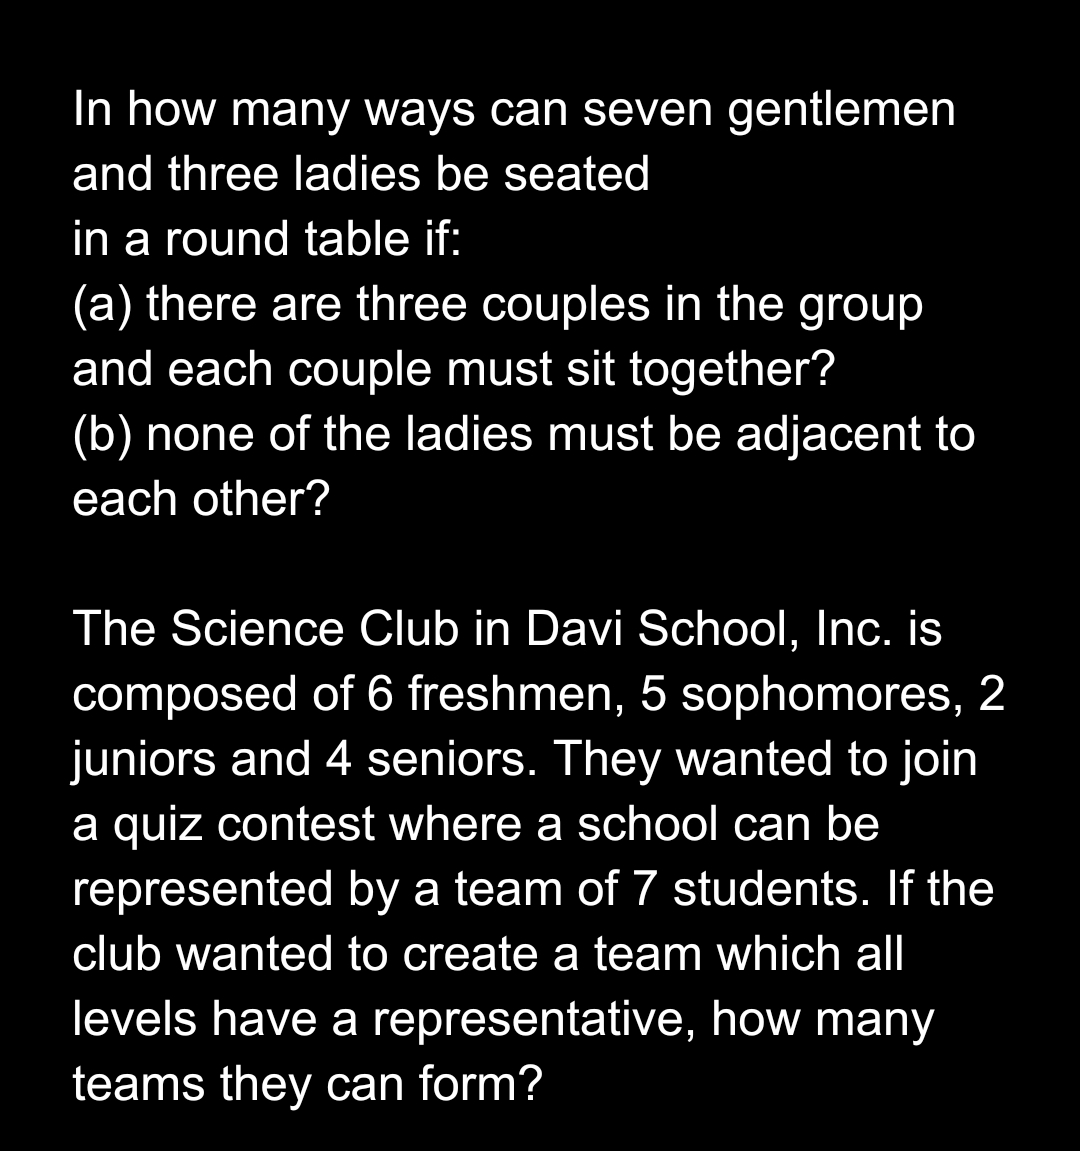 In how many ways can seven gentlemen
and three ladies be seated
in a round table if:
(a) there are three couples in the group
and each couple must sit together?
(b) none of the ladies must be adjacent to
each other?
The Science Club in Davi School, Inc. is
composed of 6 freshmen, 5 sophomores, 2
juniors and 4 seniors. They wanted to join
a quiz contest where a school can be
represented by a team of 7 students. If the
club wanted to create a team which all
levels have a representative, how many
teams they can form?
